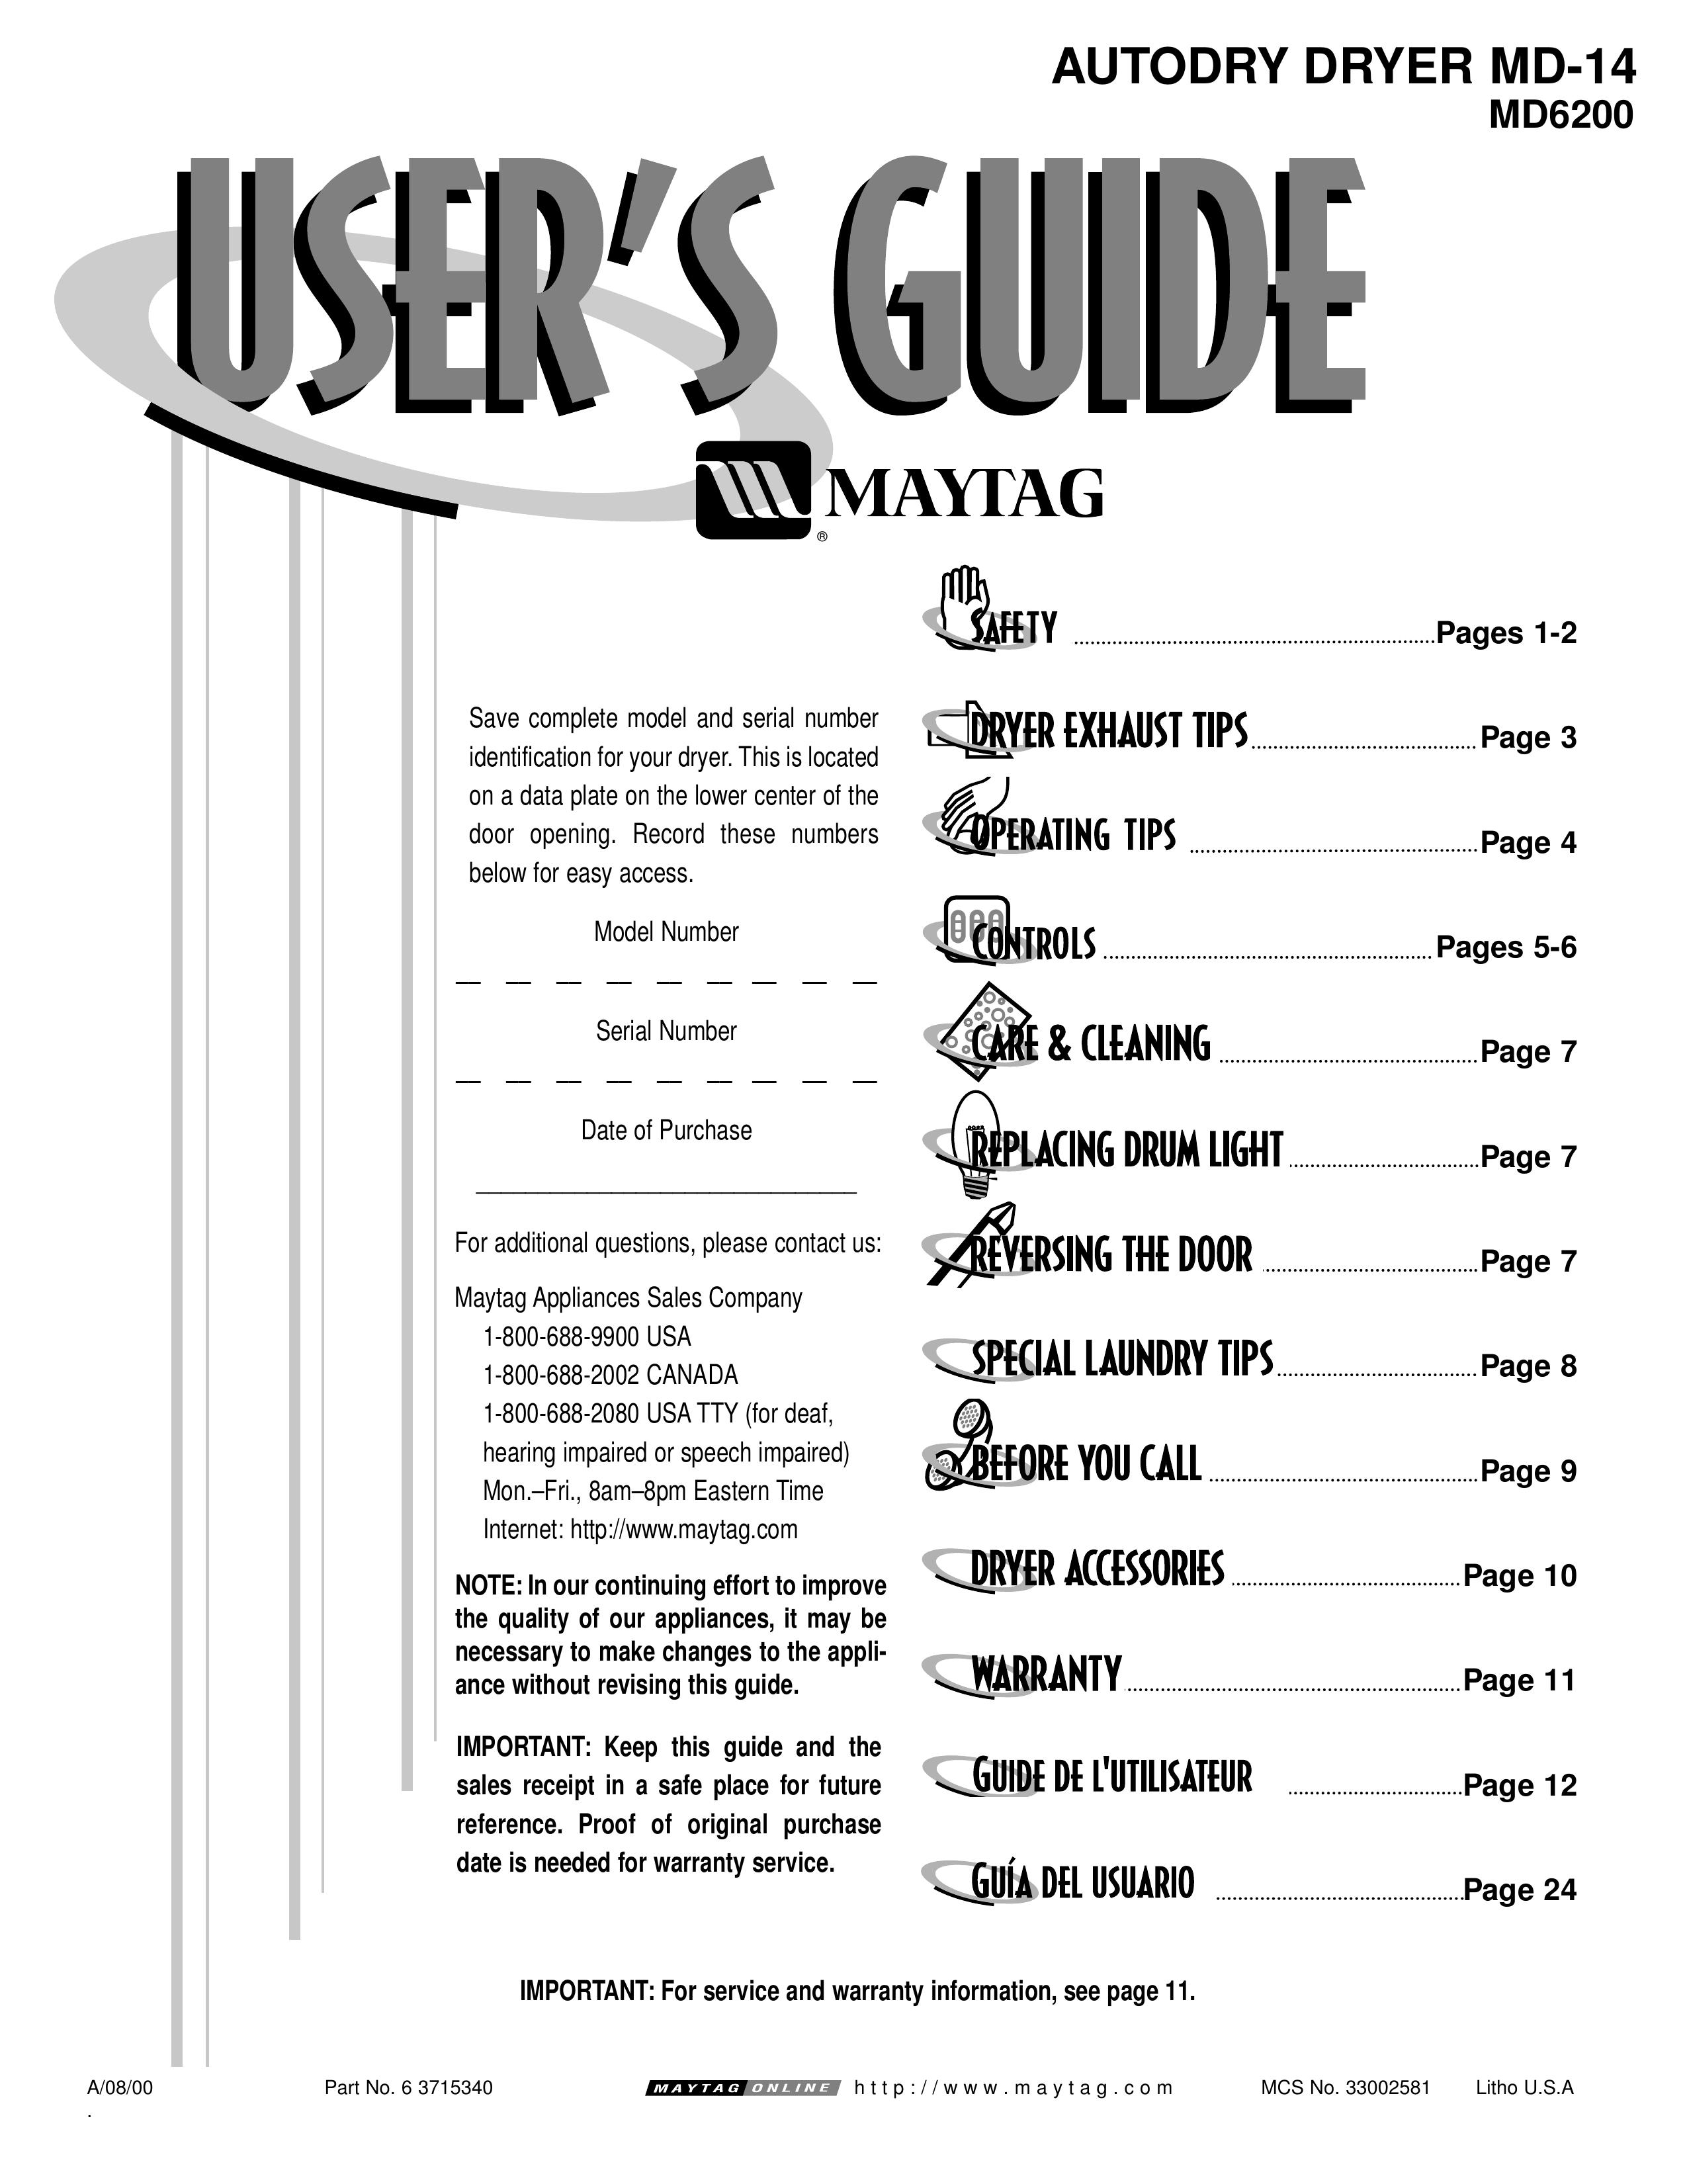 Maytag MD-14 Clothes Dryer User Manual